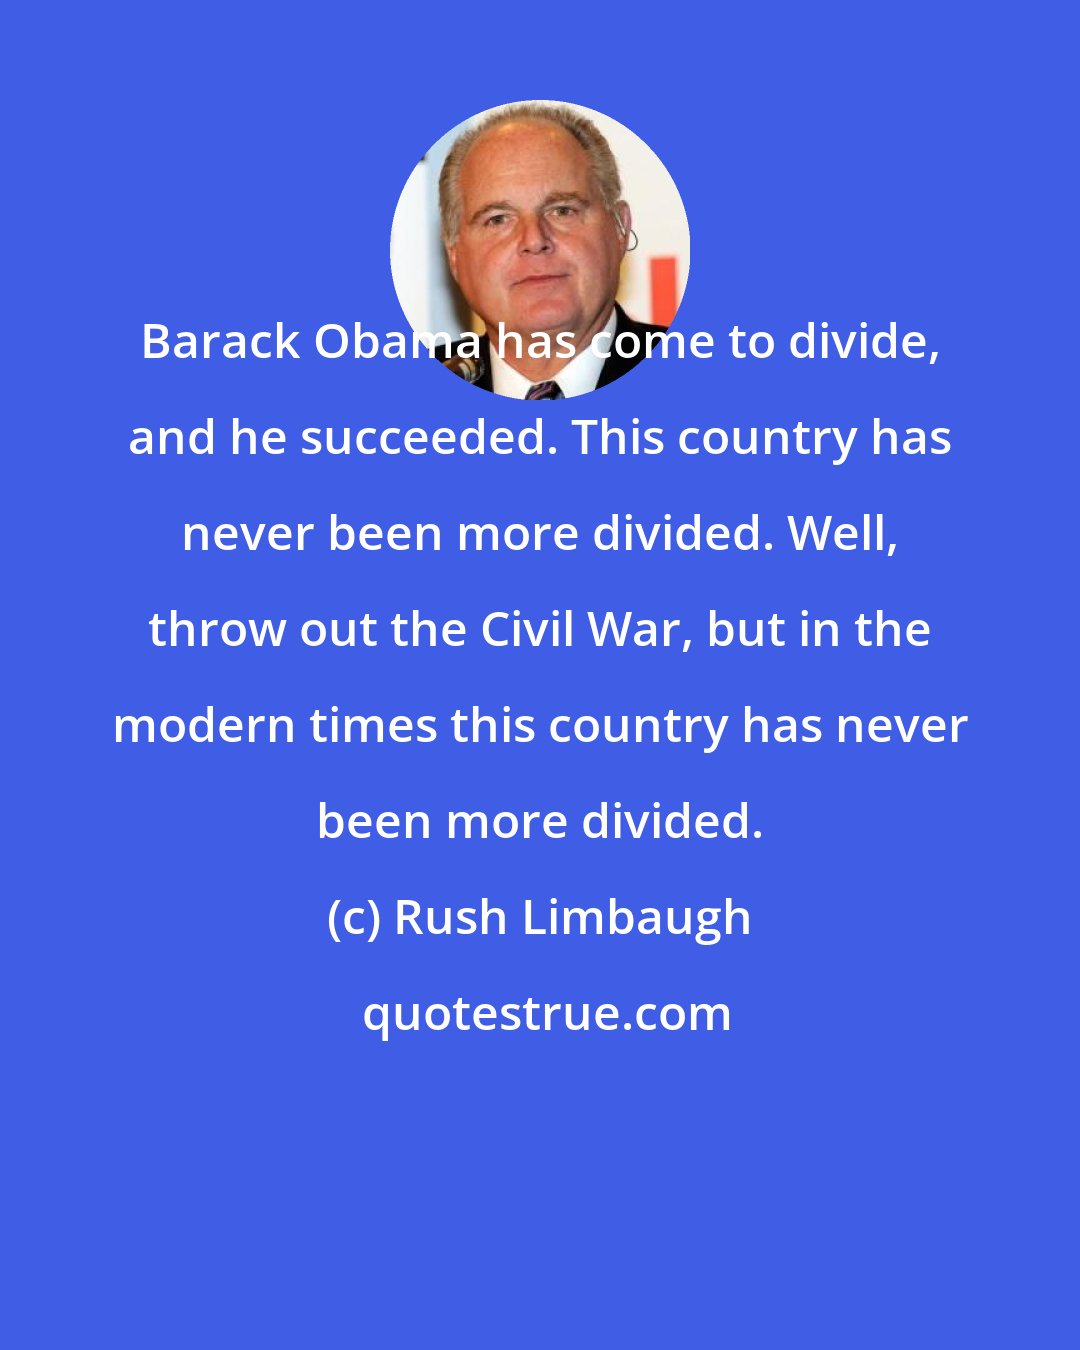 Rush Limbaugh: Barack Obama has come to divide, and he succeeded. This country has never been more divided. Well, throw out the Civil War, but in the modern times this country has never been more divided.